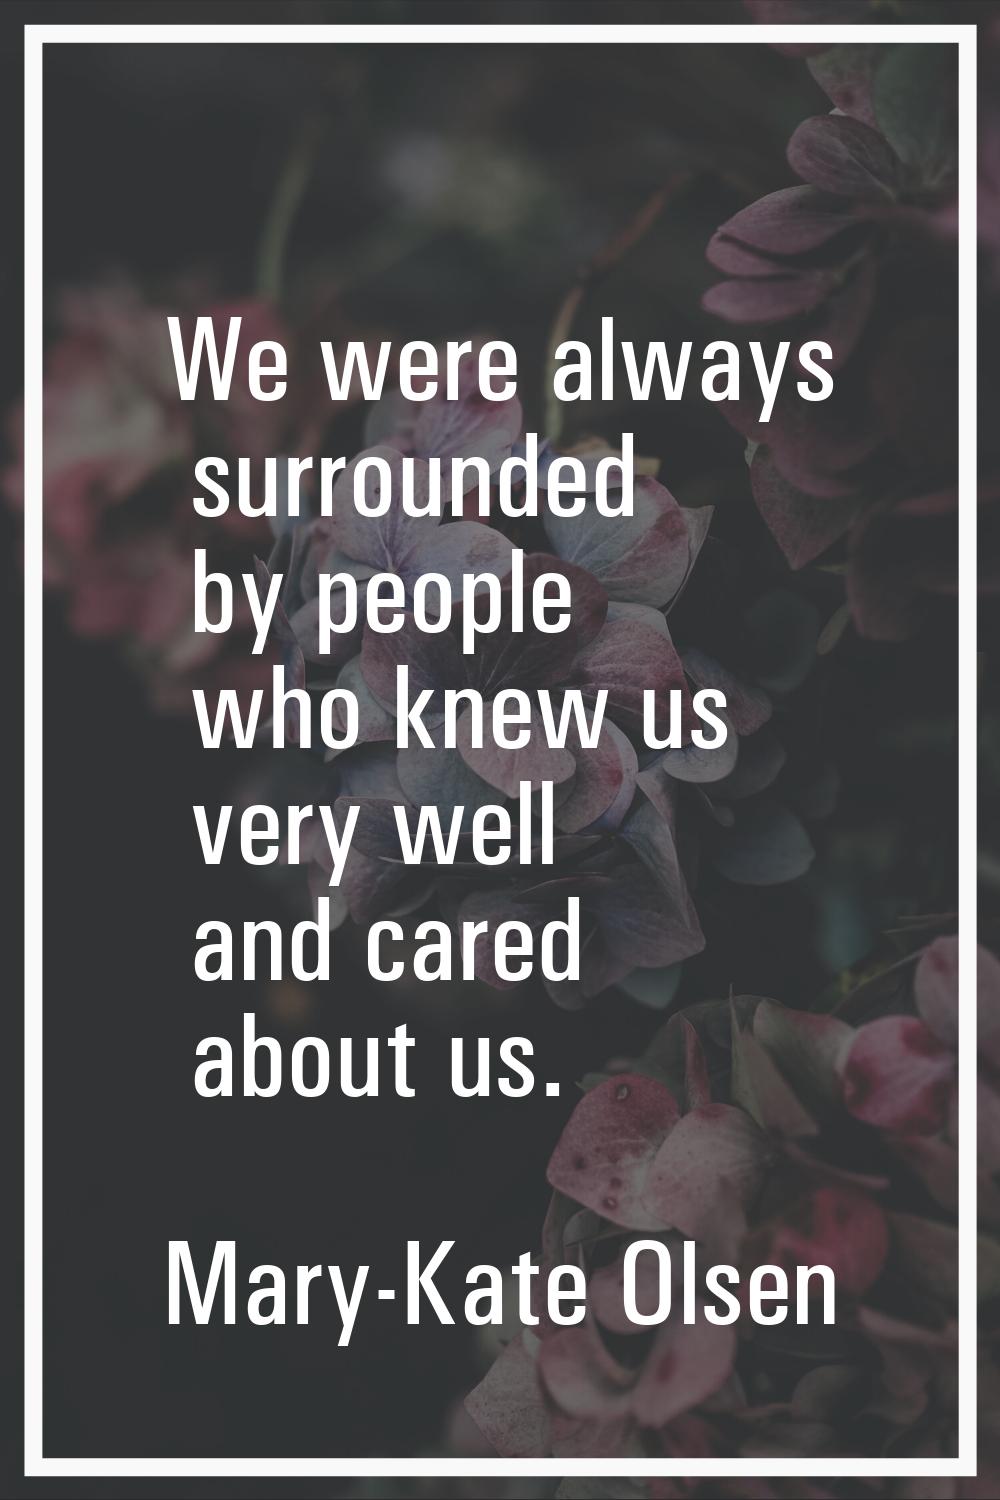 We were always surrounded by people who knew us very well and cared about us.